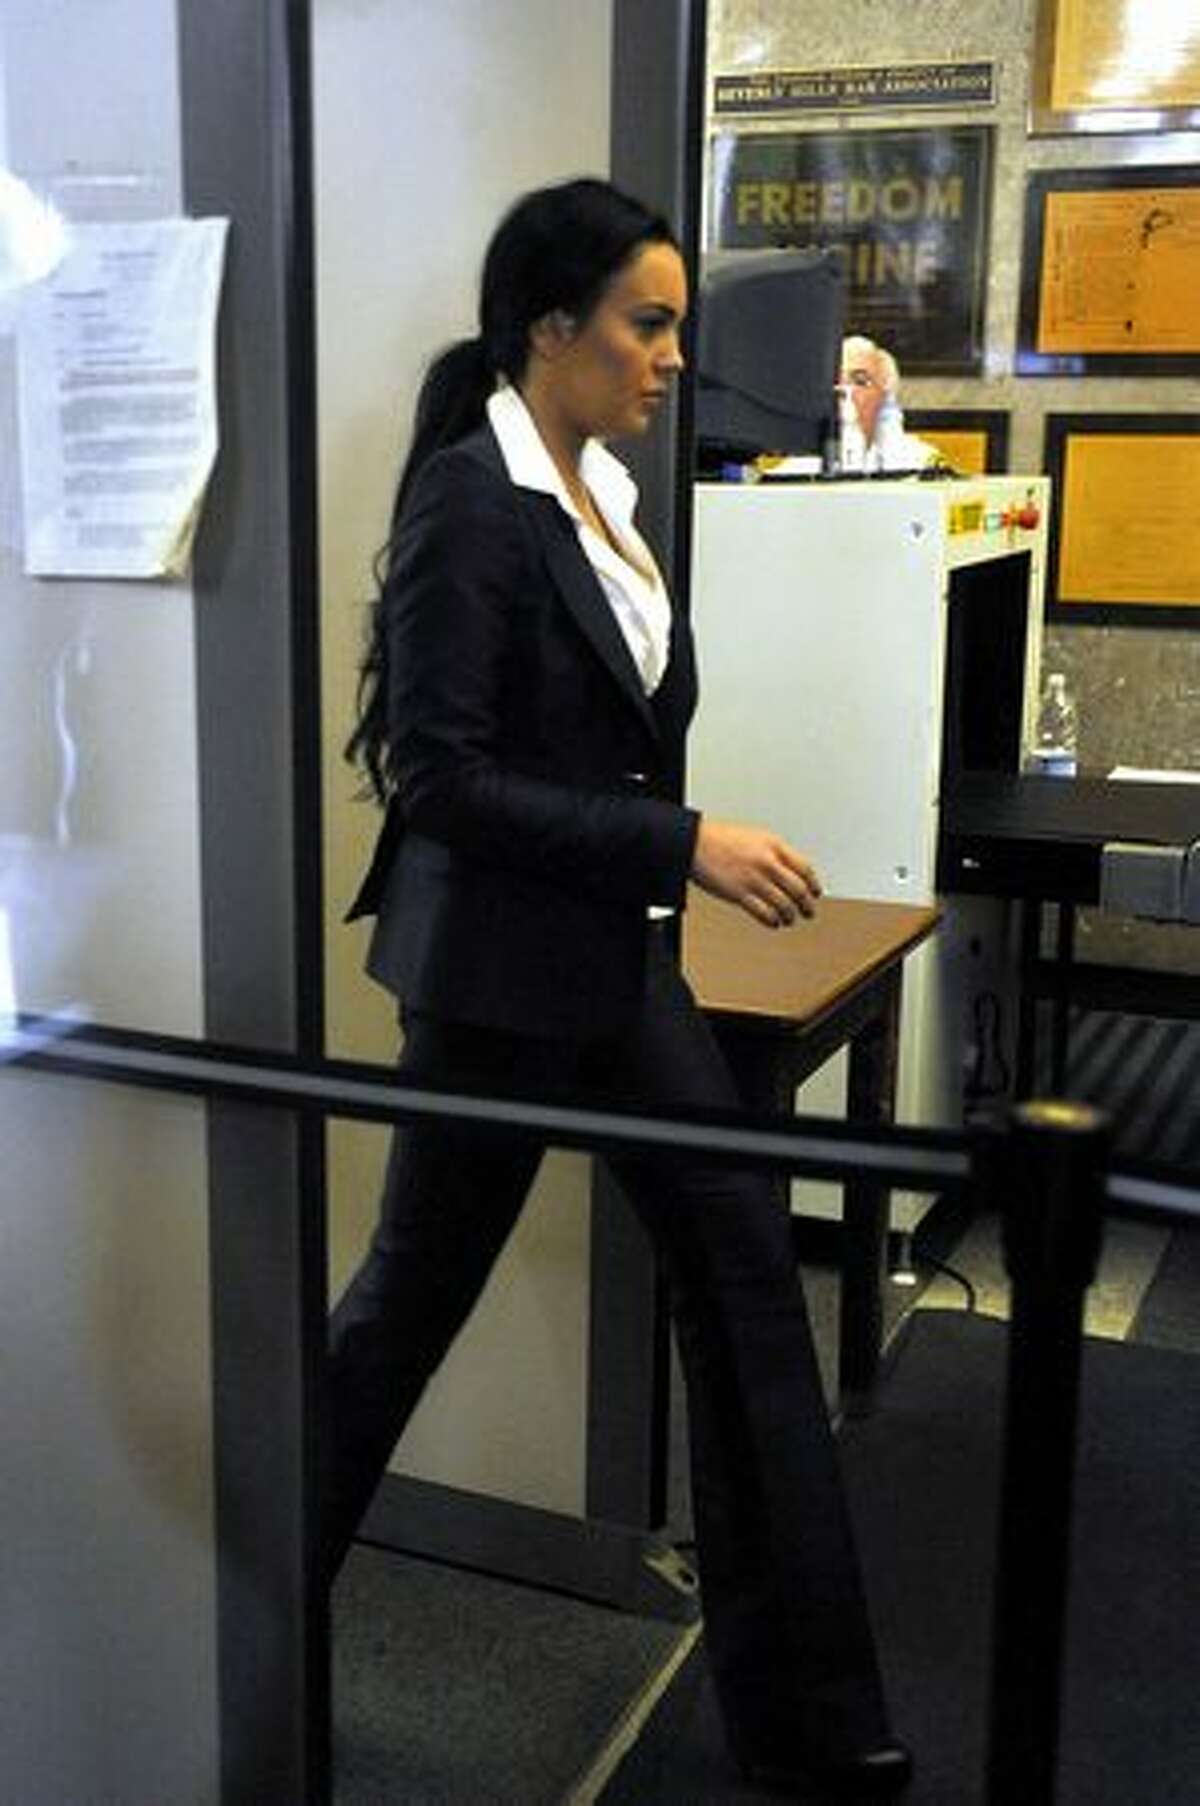 Lohan arrives at court for her probation status hearing on Monday.